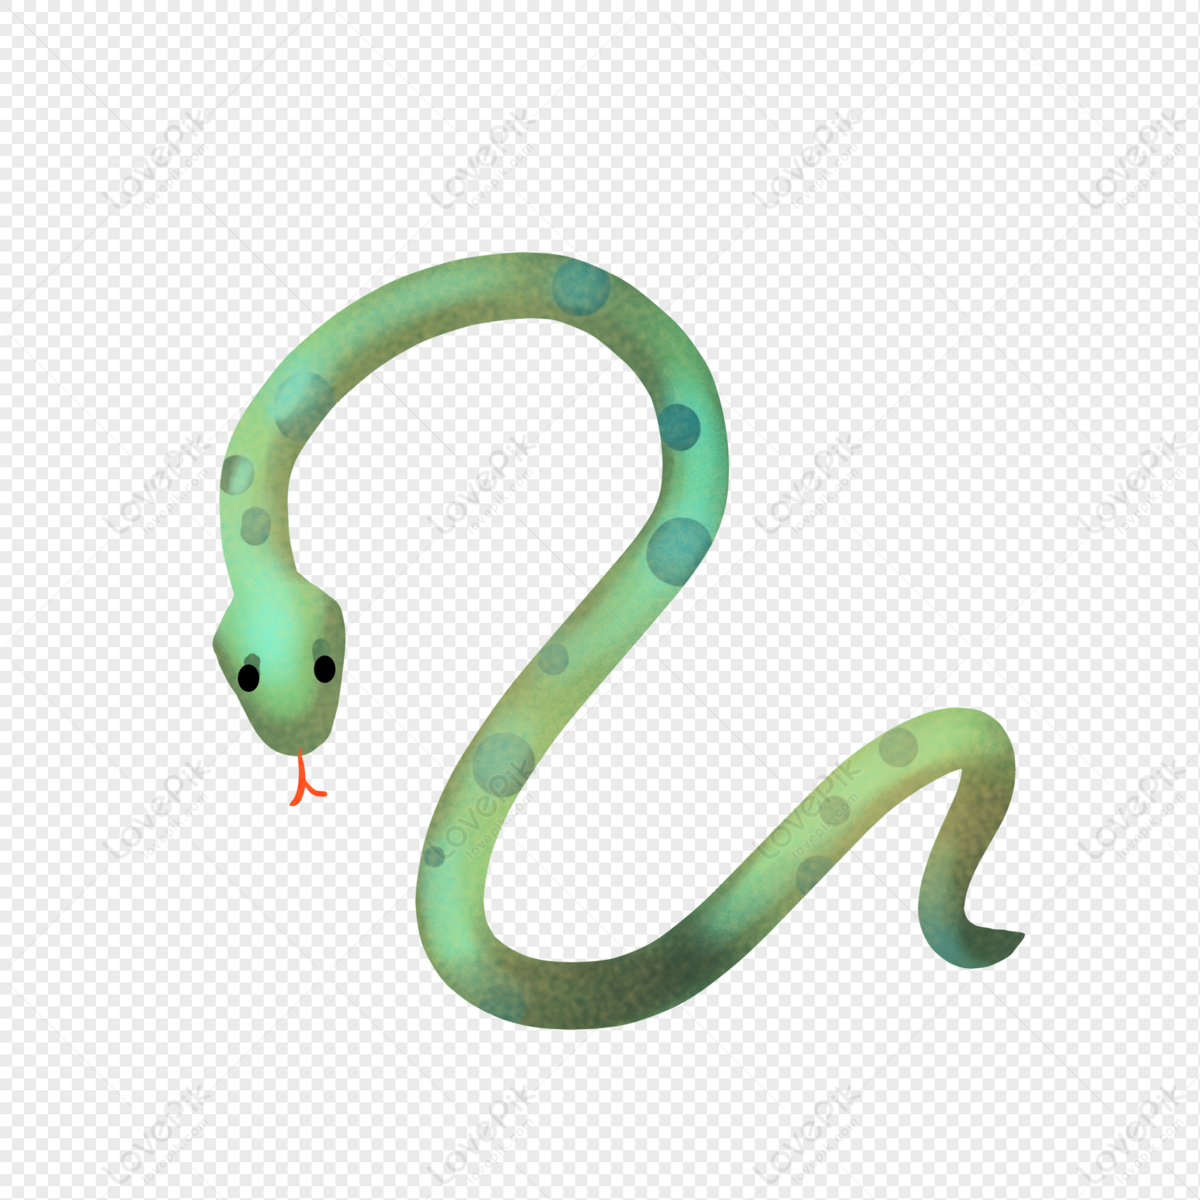 Snake PNG Picture And Clipart Image For Free Download - Lovepik | 401127855